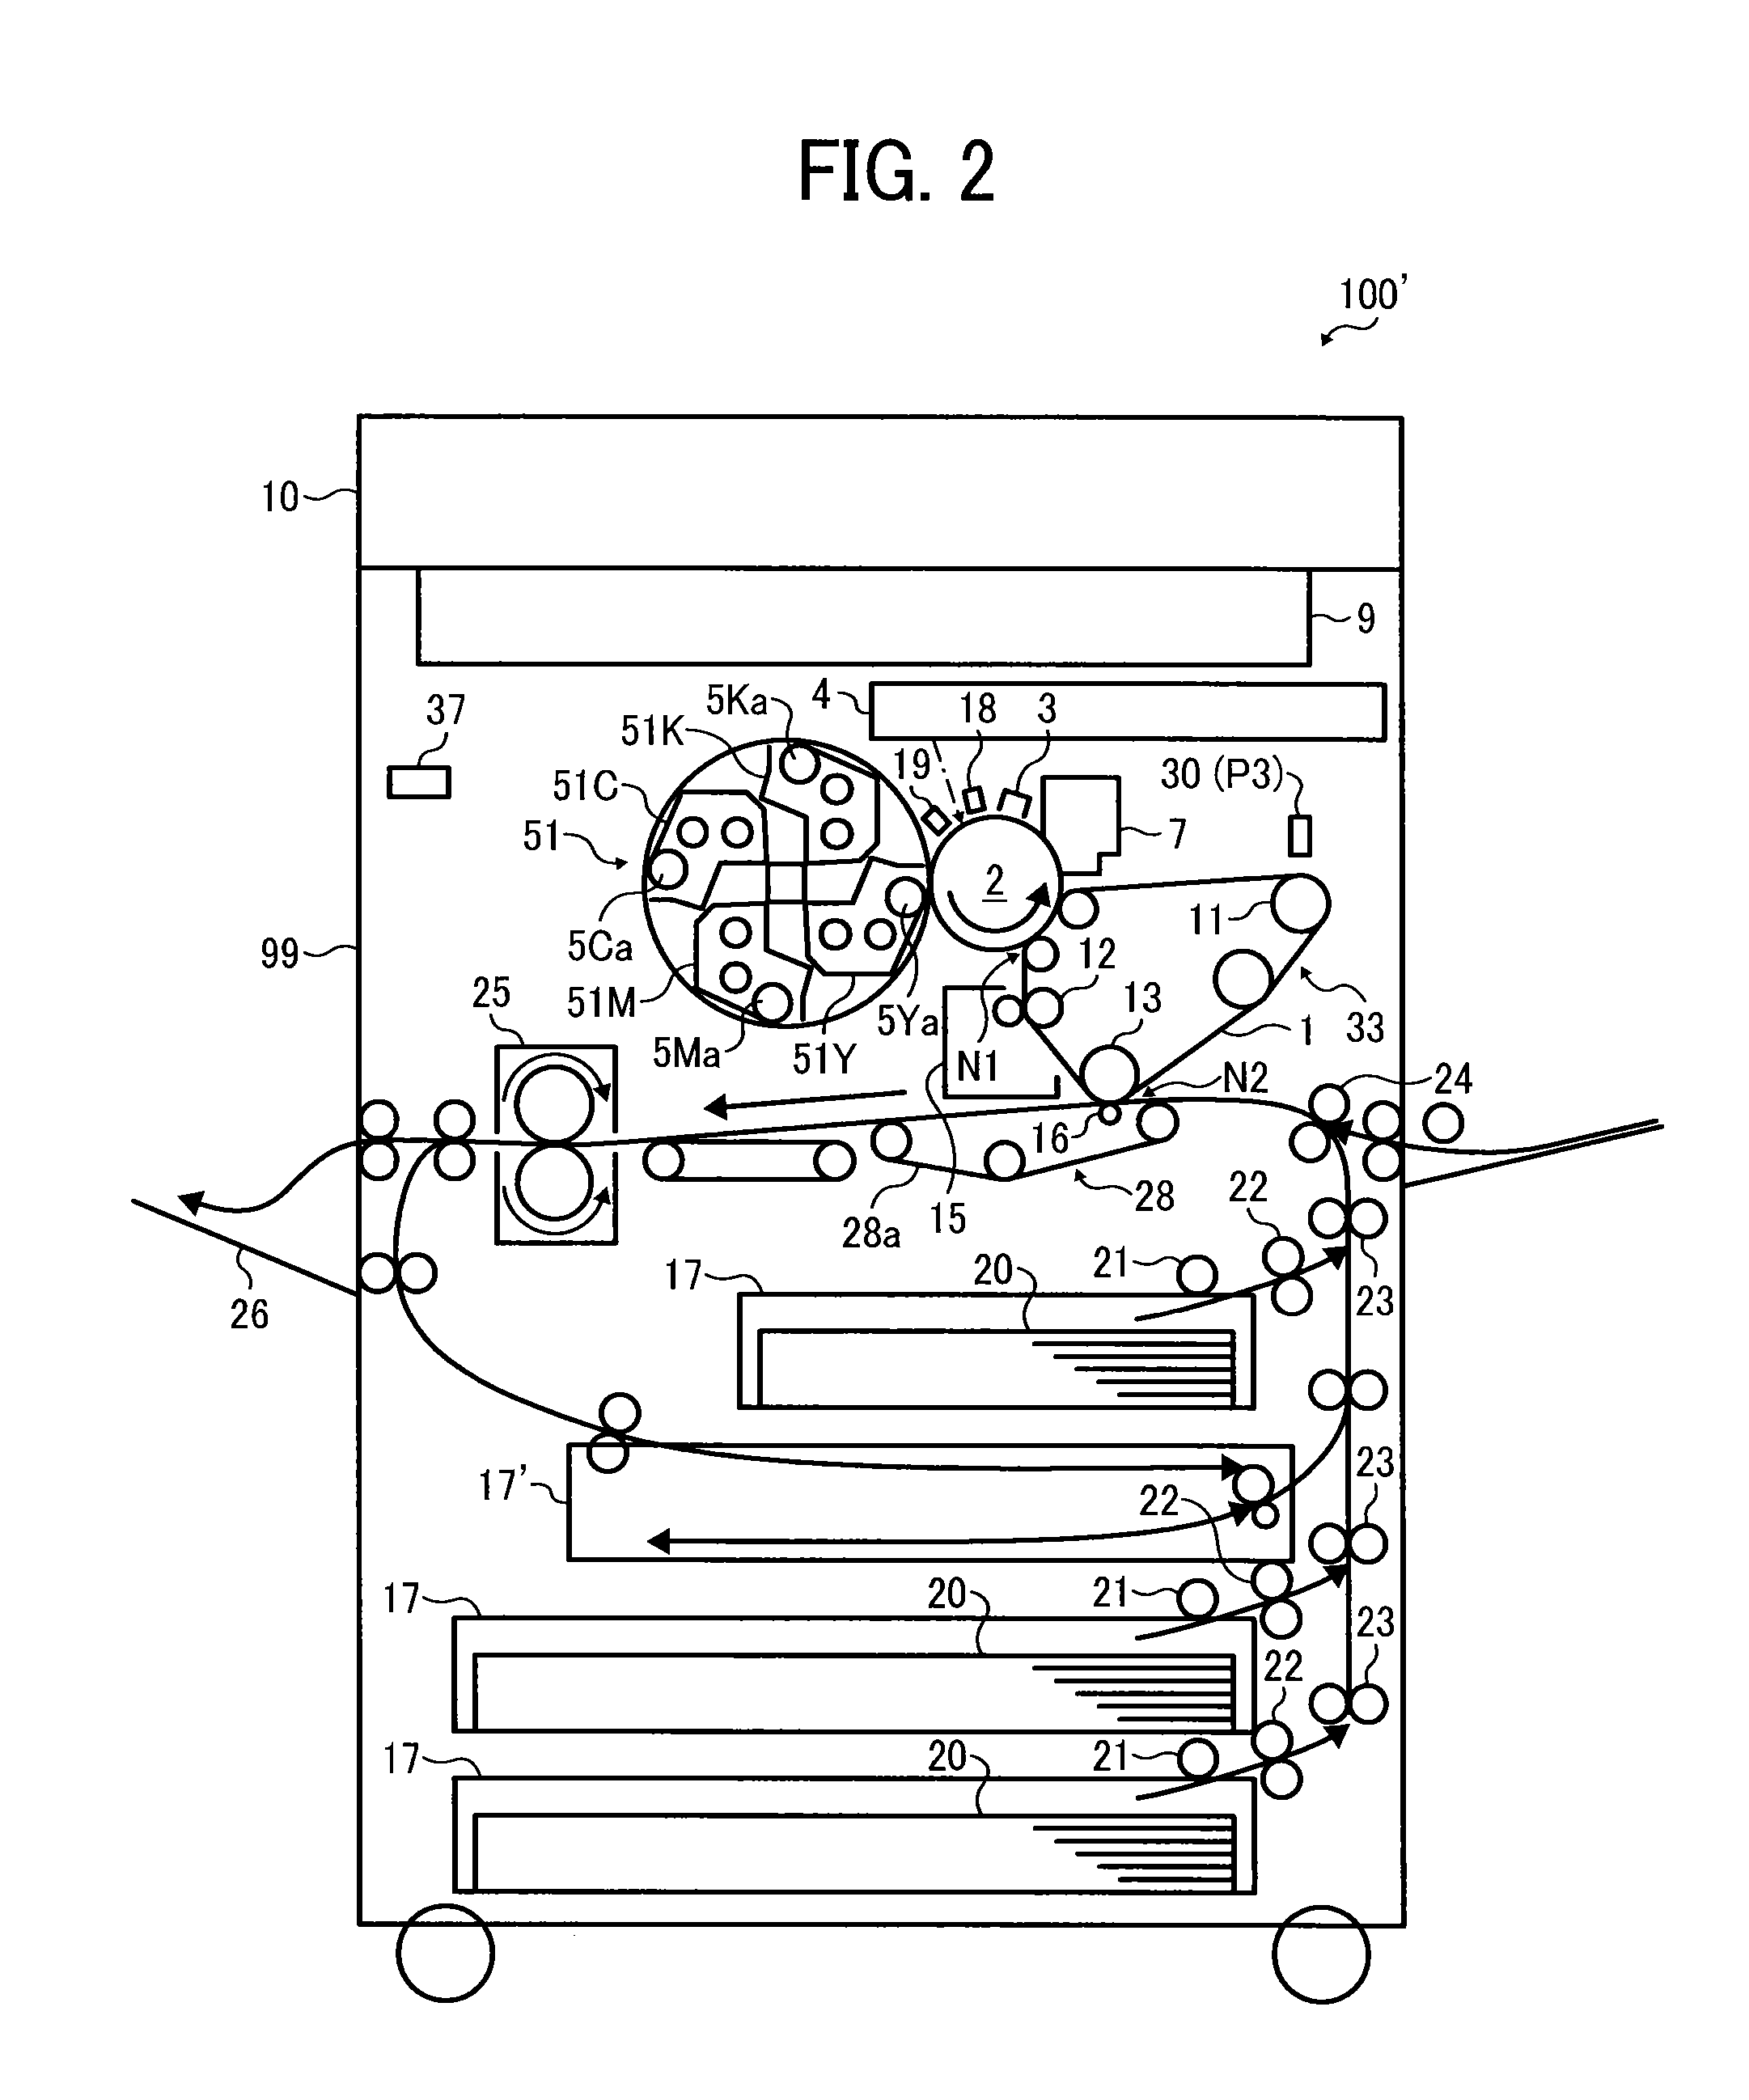 Image forming apparatus and image forming method